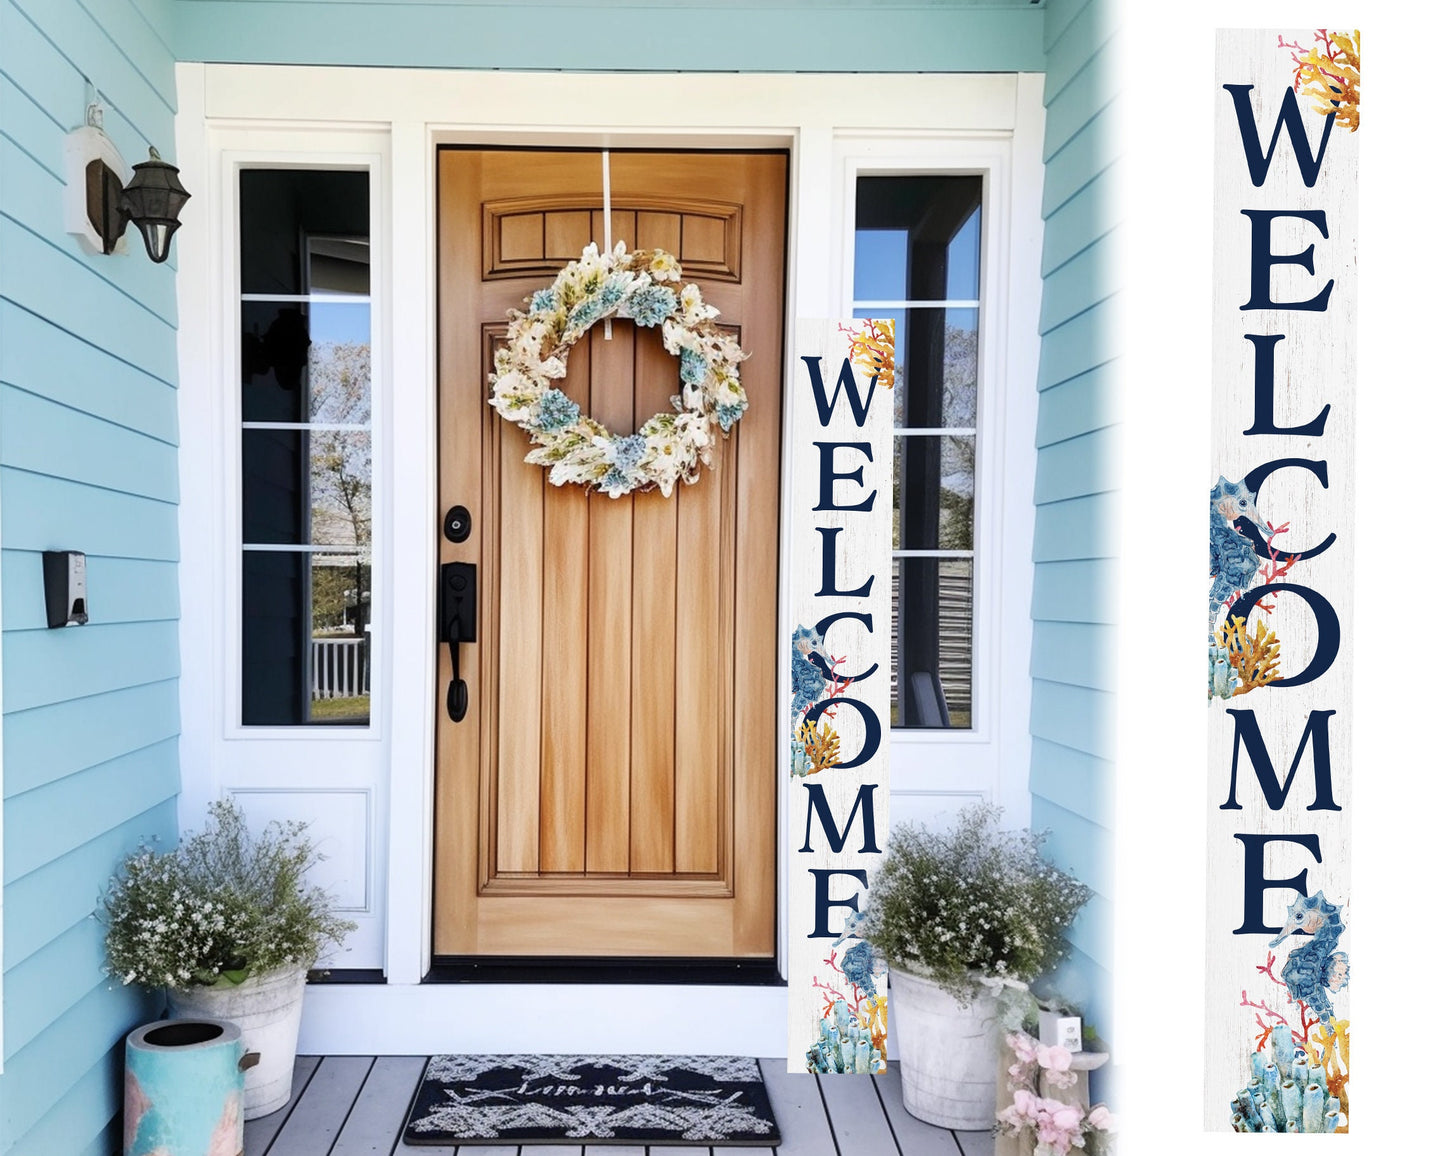 72in Summer Welcome Outdoor Sign with Seahorse Design | Front Door Porch Decor | Coastal Welcome Sign | Summer Farmhouse Home Decorations